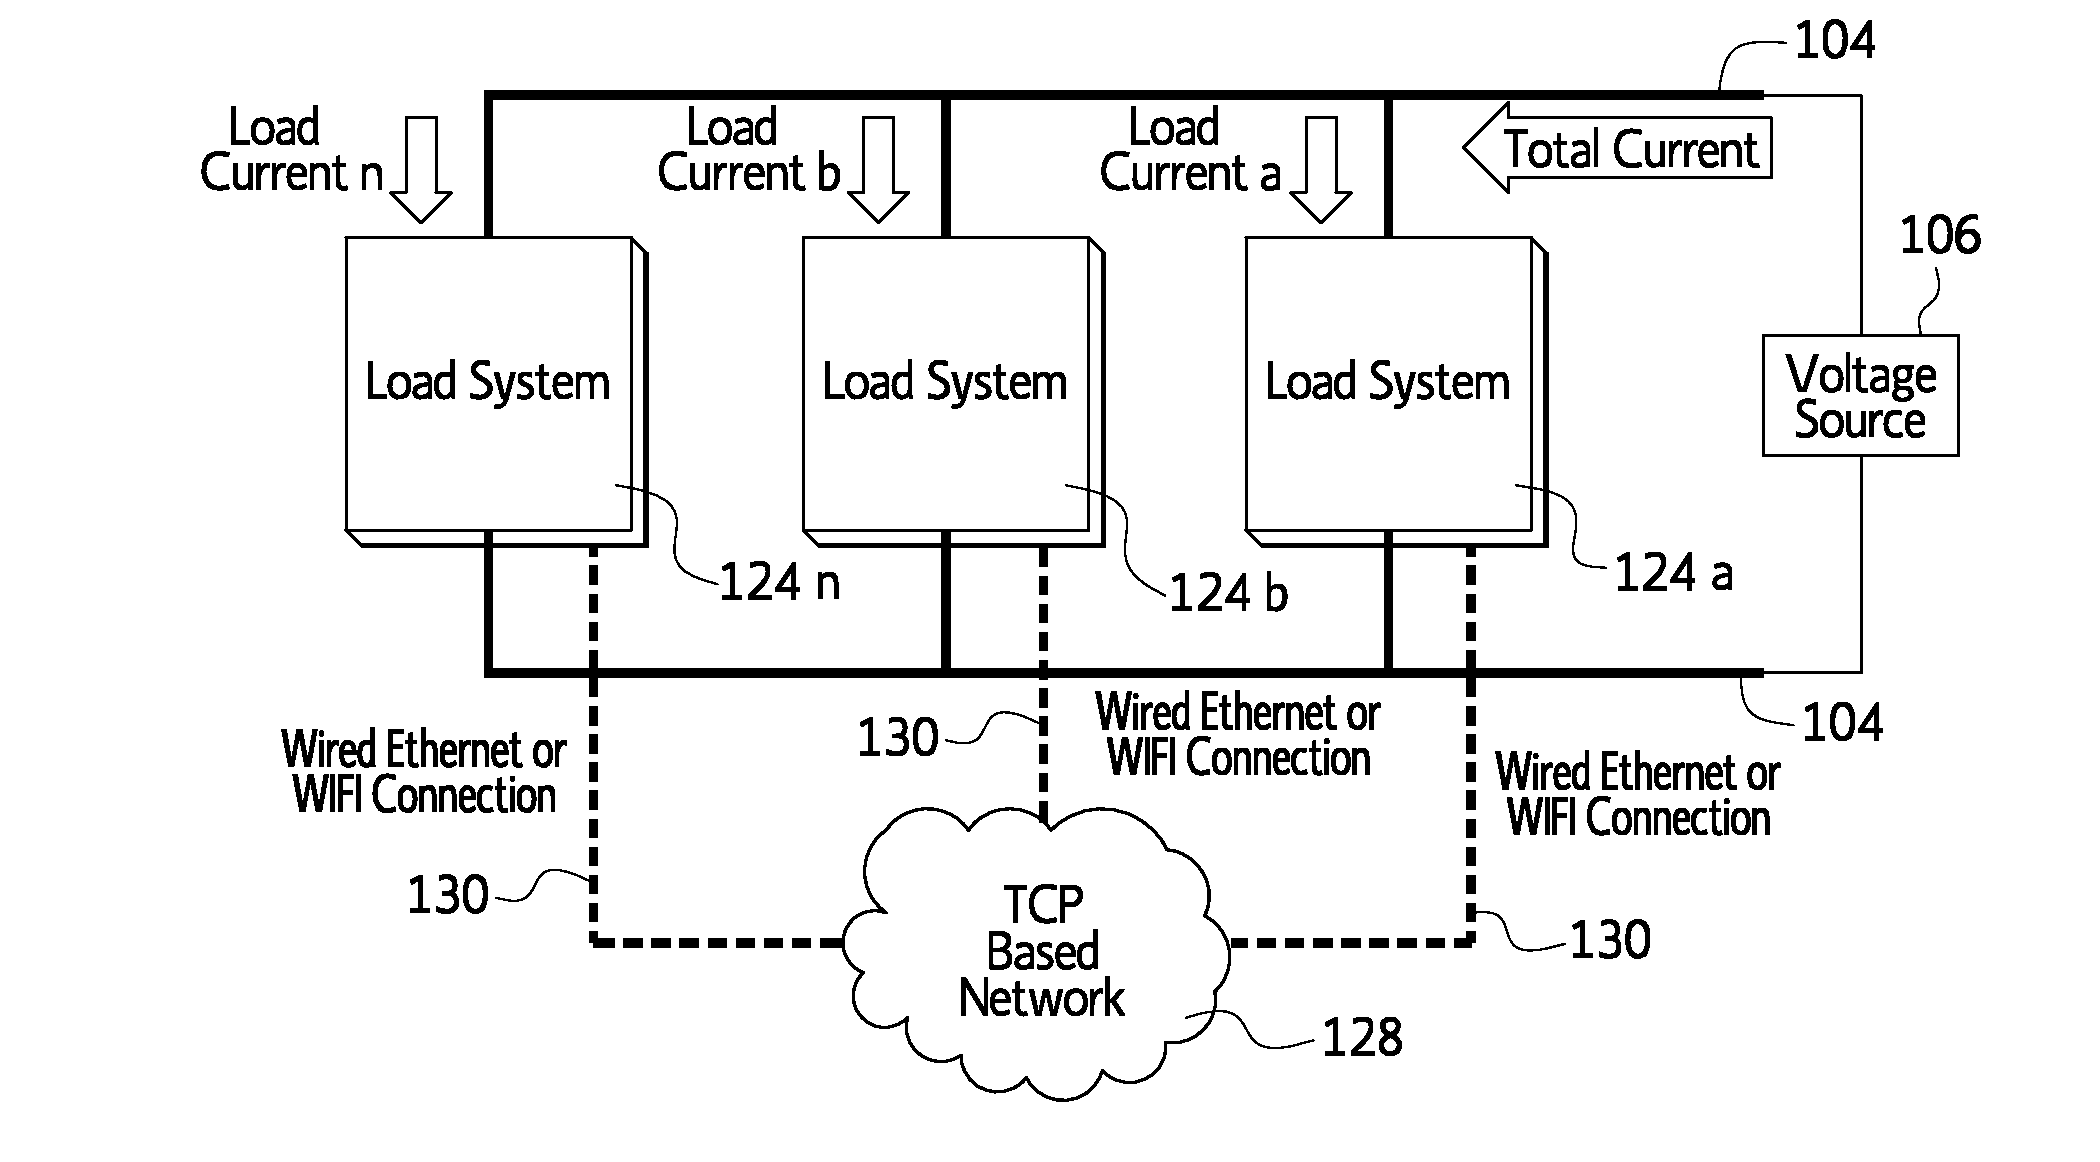 Virtual parallel load bank system